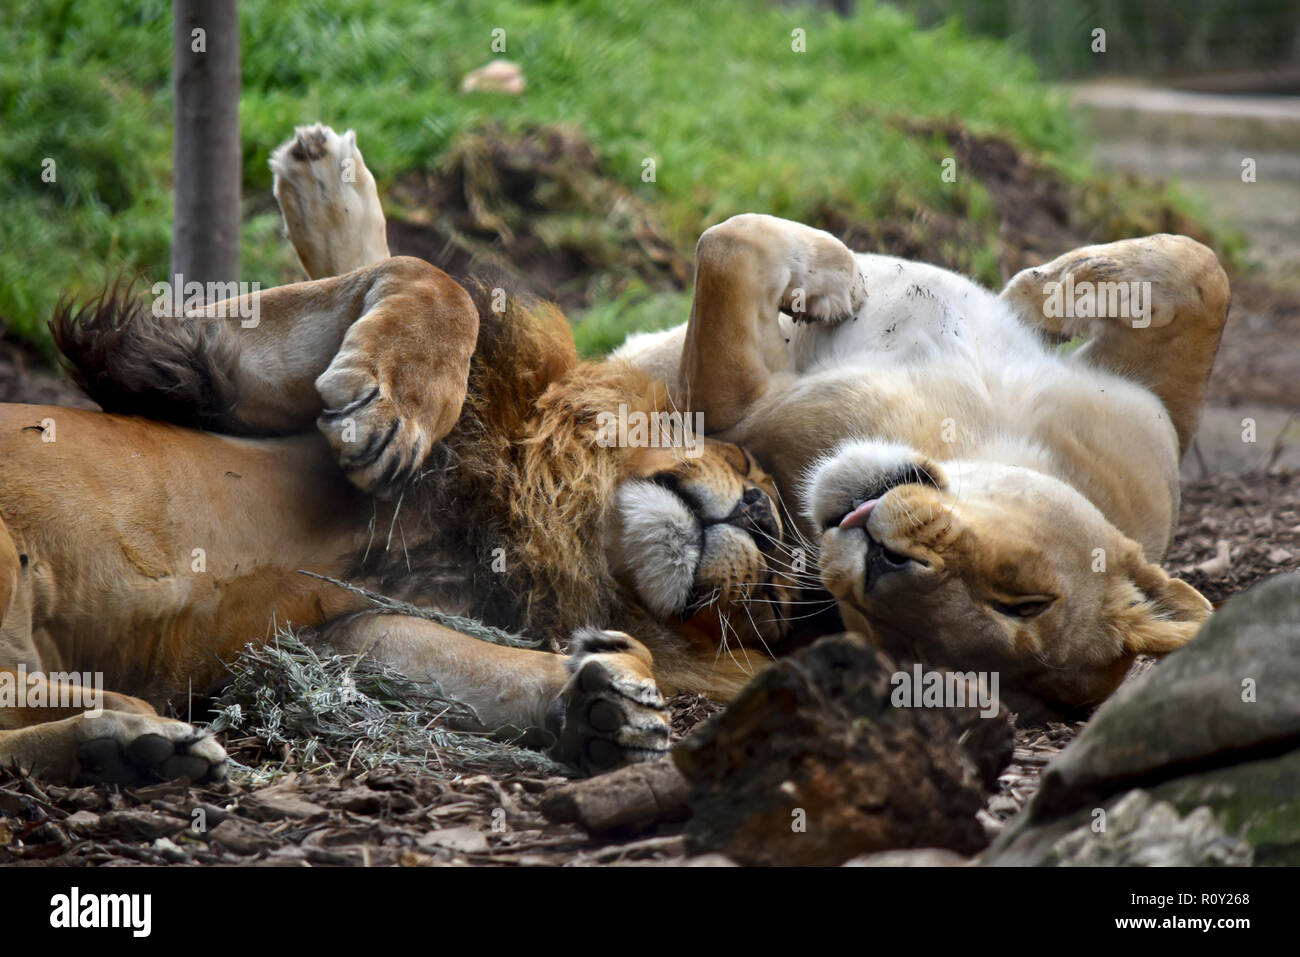 the lion and lioness are playing rolling around on the grass Stock Photo